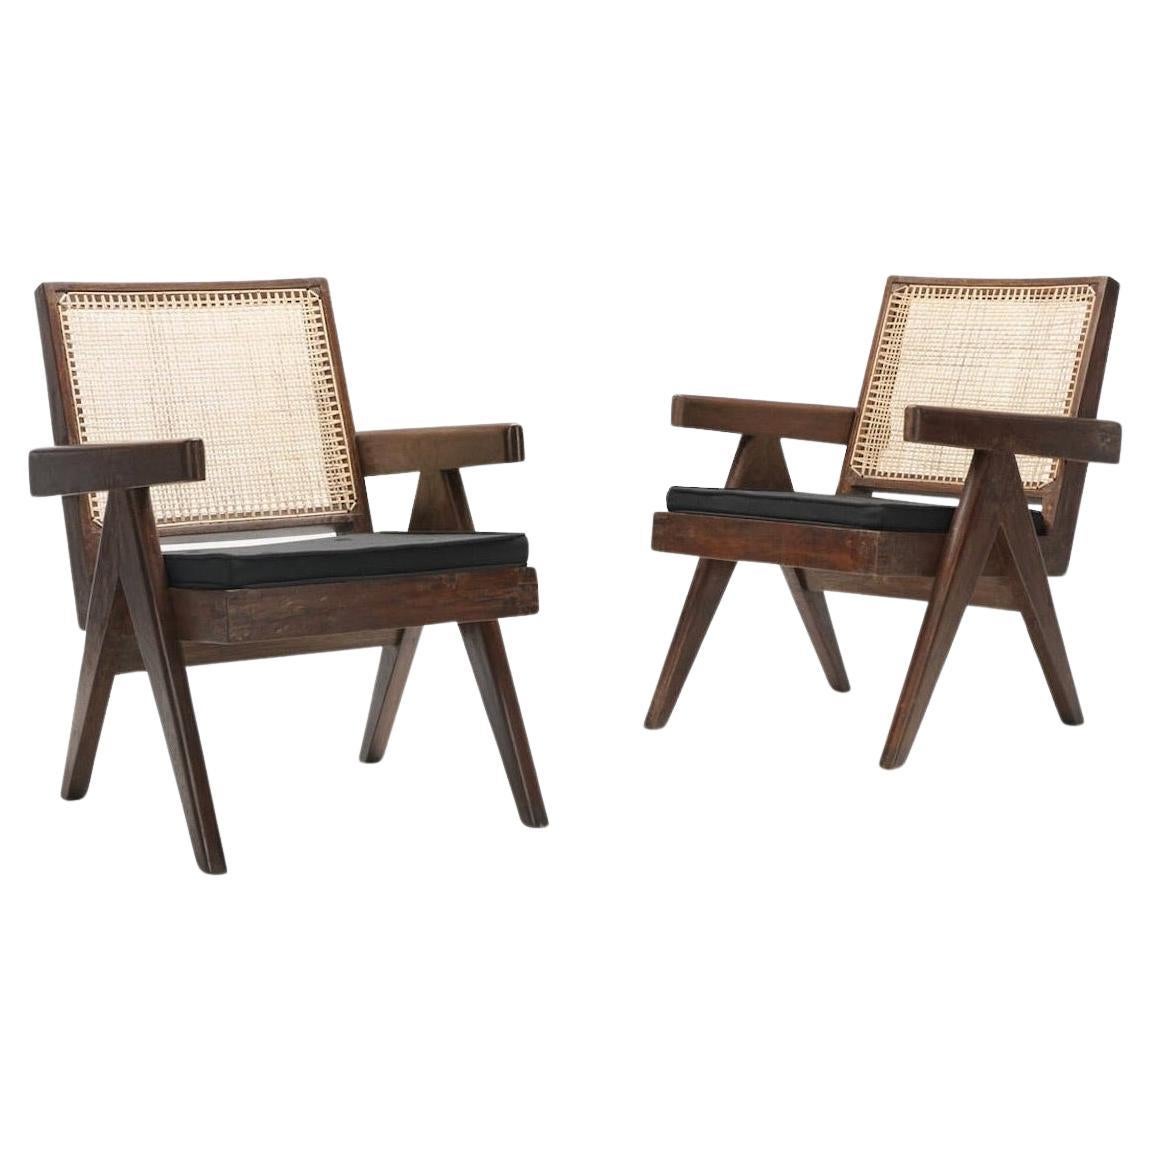 A beautiful set of 2 Pierre Jeanneret easy armchairs in solid teak from Punjab University, Chandigarh.
Stenciled markings to reverse of each example. Set includes black cushions.
The simplicity of the design, yet robust and functional has inspired